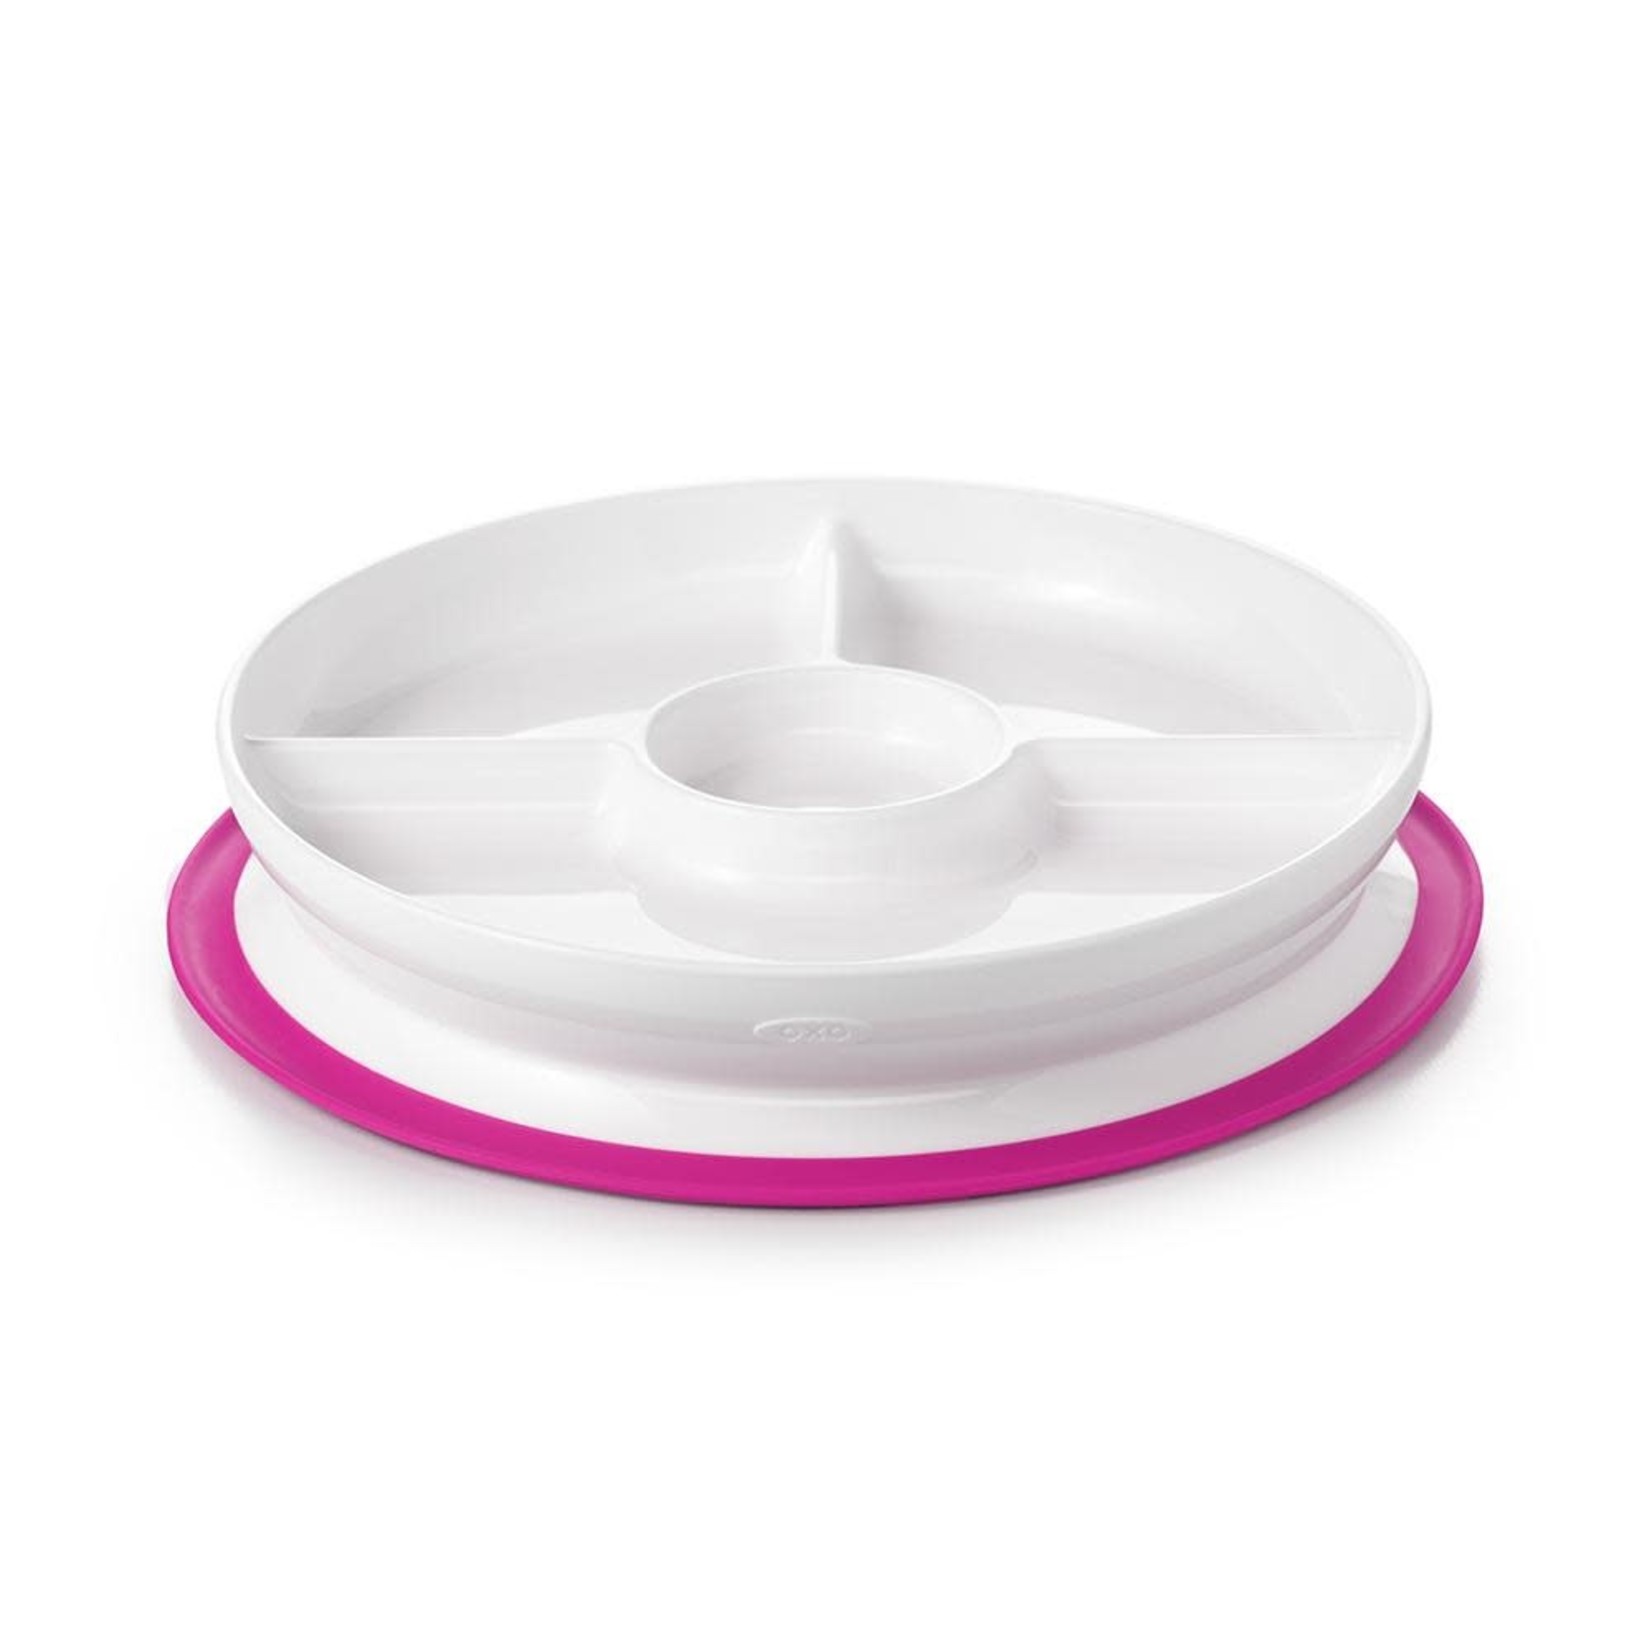 OXO Tot STICK & STAY DIVIDED PLATE PINK